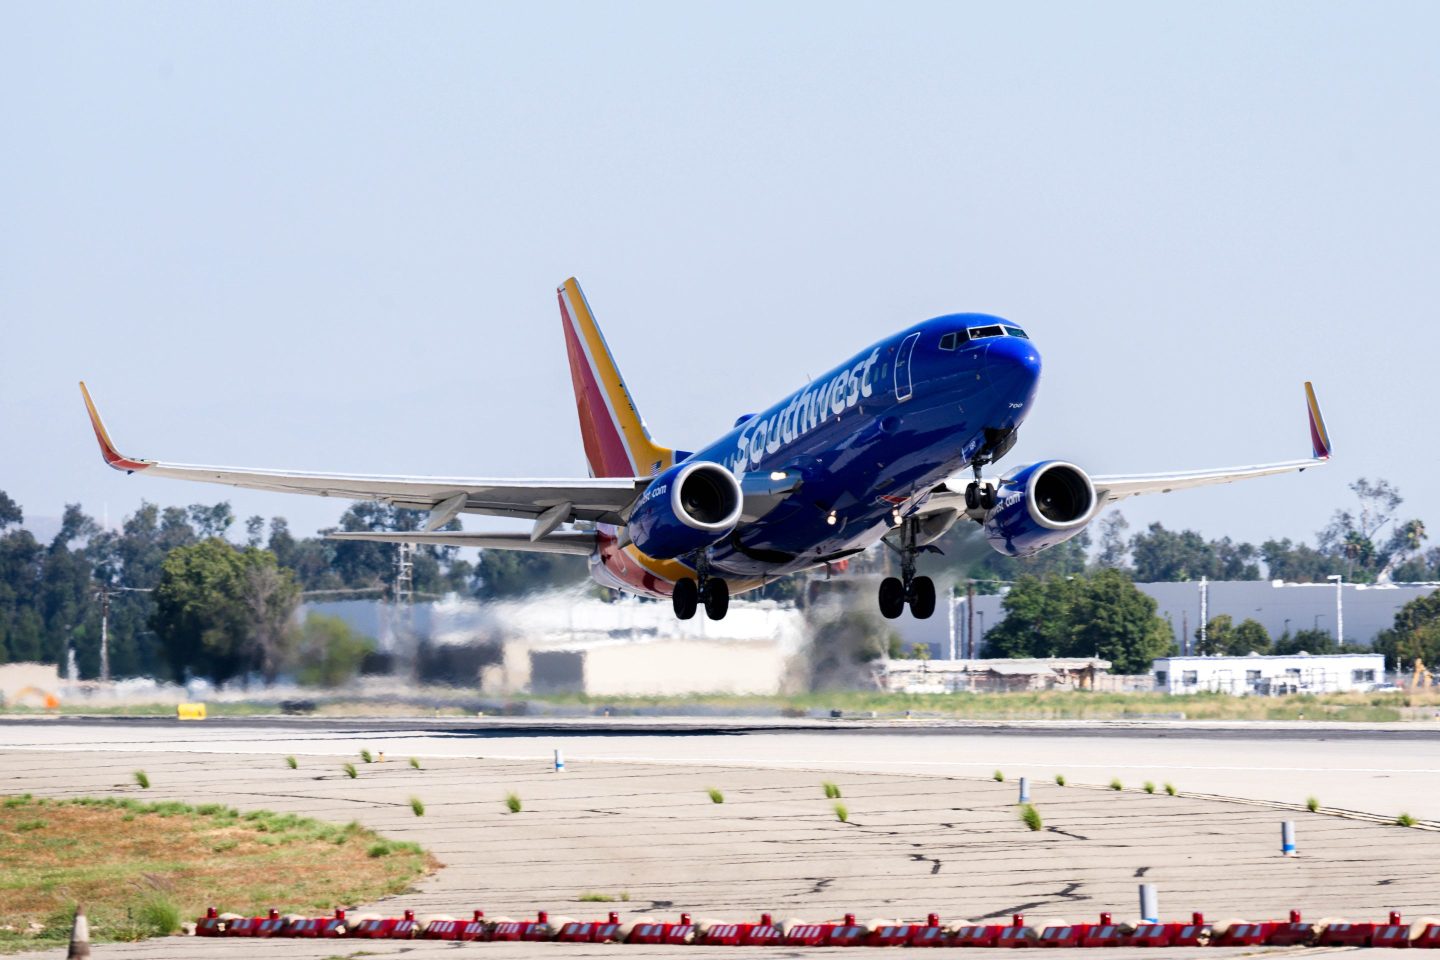 Ontario, CA - September 19: Ontario, CA - September 19: A Southwest Airlines airplane takes off on the runway, as ongoing maintenance construction takes place on existing runways and taxiways at Ontario International Airport in Ontario on Tuesday, Sept. 19, 2023. Ontario International Airport secured nearly $16 million in federal funding for essential runway upgrades. (Photo by Watchara Phomicinda/MediaNews Group/The Press-Enterprise via Getty Images)